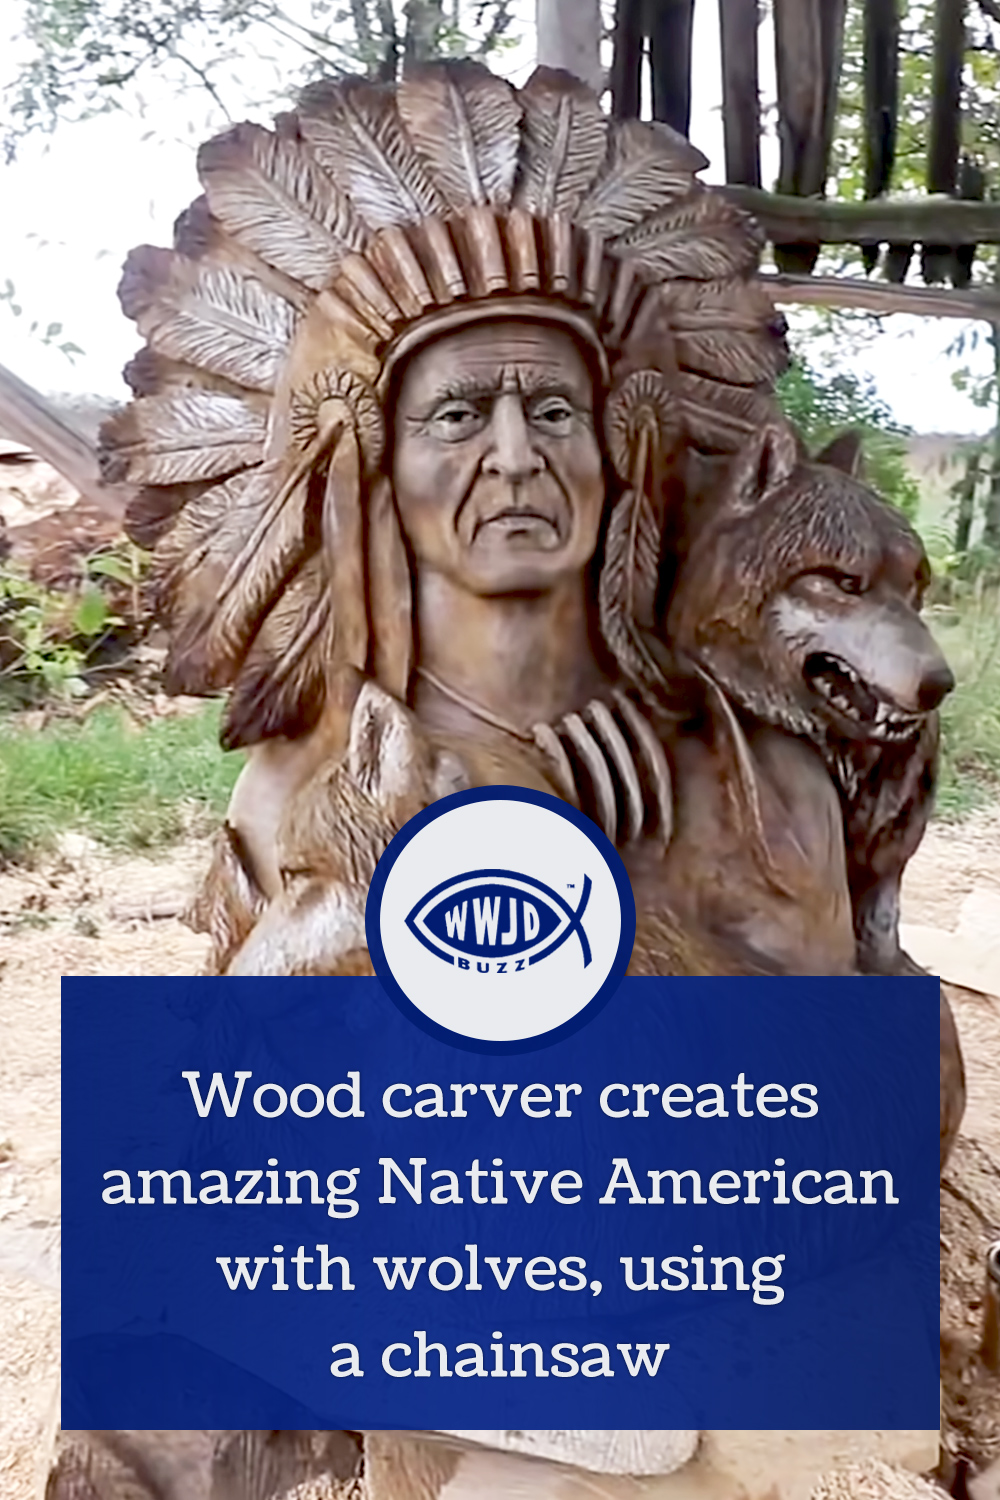 Wood carver creates amazing Native American with wolves, using a chainsaw